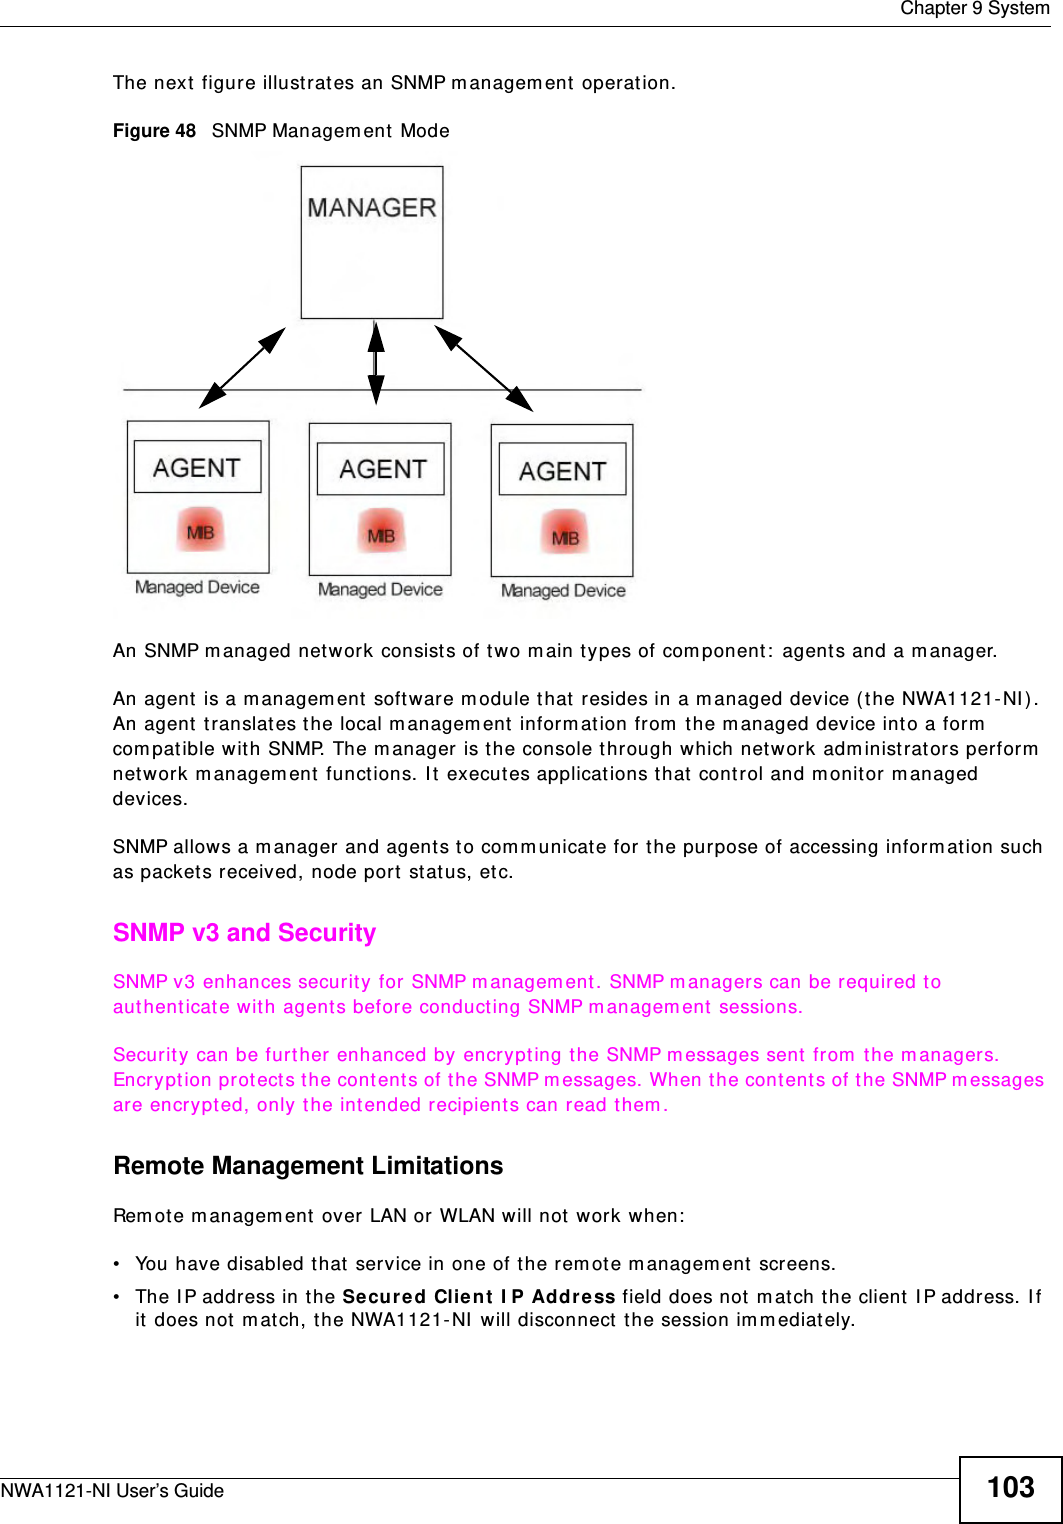  Chapter 9 SystemNWA1121-NI User’s Guide 103The next figure illustrates an SNMP management operation. Figure 48   SNMP Management ModeAn SNMP managed network consists of two main types of component: agents and a manager. An agent is a management software module that resides in a managed device (the NWA1121-NI). An agent translates the local management information from the managed device into a form compatible with SNMP. The manager is the console through which network administrators perform network management functions. It executes applications that control and monitor managed devices. SNMP allows a manager and agents to communicate for the purpose of accessing information such as packets received, node port status, etc.SNMP v3 and SecuritySNMP v3 enhances security for SNMP management. SNMP managers can be required to authenticate with agents before conducting SNMP management sessions.Security can be further enhanced by encrypting the SNMP messages sent from the managers. Encryption protects the contents of the SNMP messages. When the contents of the SNMP messages are encrypted, only the intended recipients can read them.Remote Management LimitationsRemote management over LAN or WLAN will not work when:• You have disabled that service in one of the remote management screens.• The IP address in the Secured Client IP Address field does not match the client IP address. If it does not match, the NWA1121-NI will disconnect the session immediately.